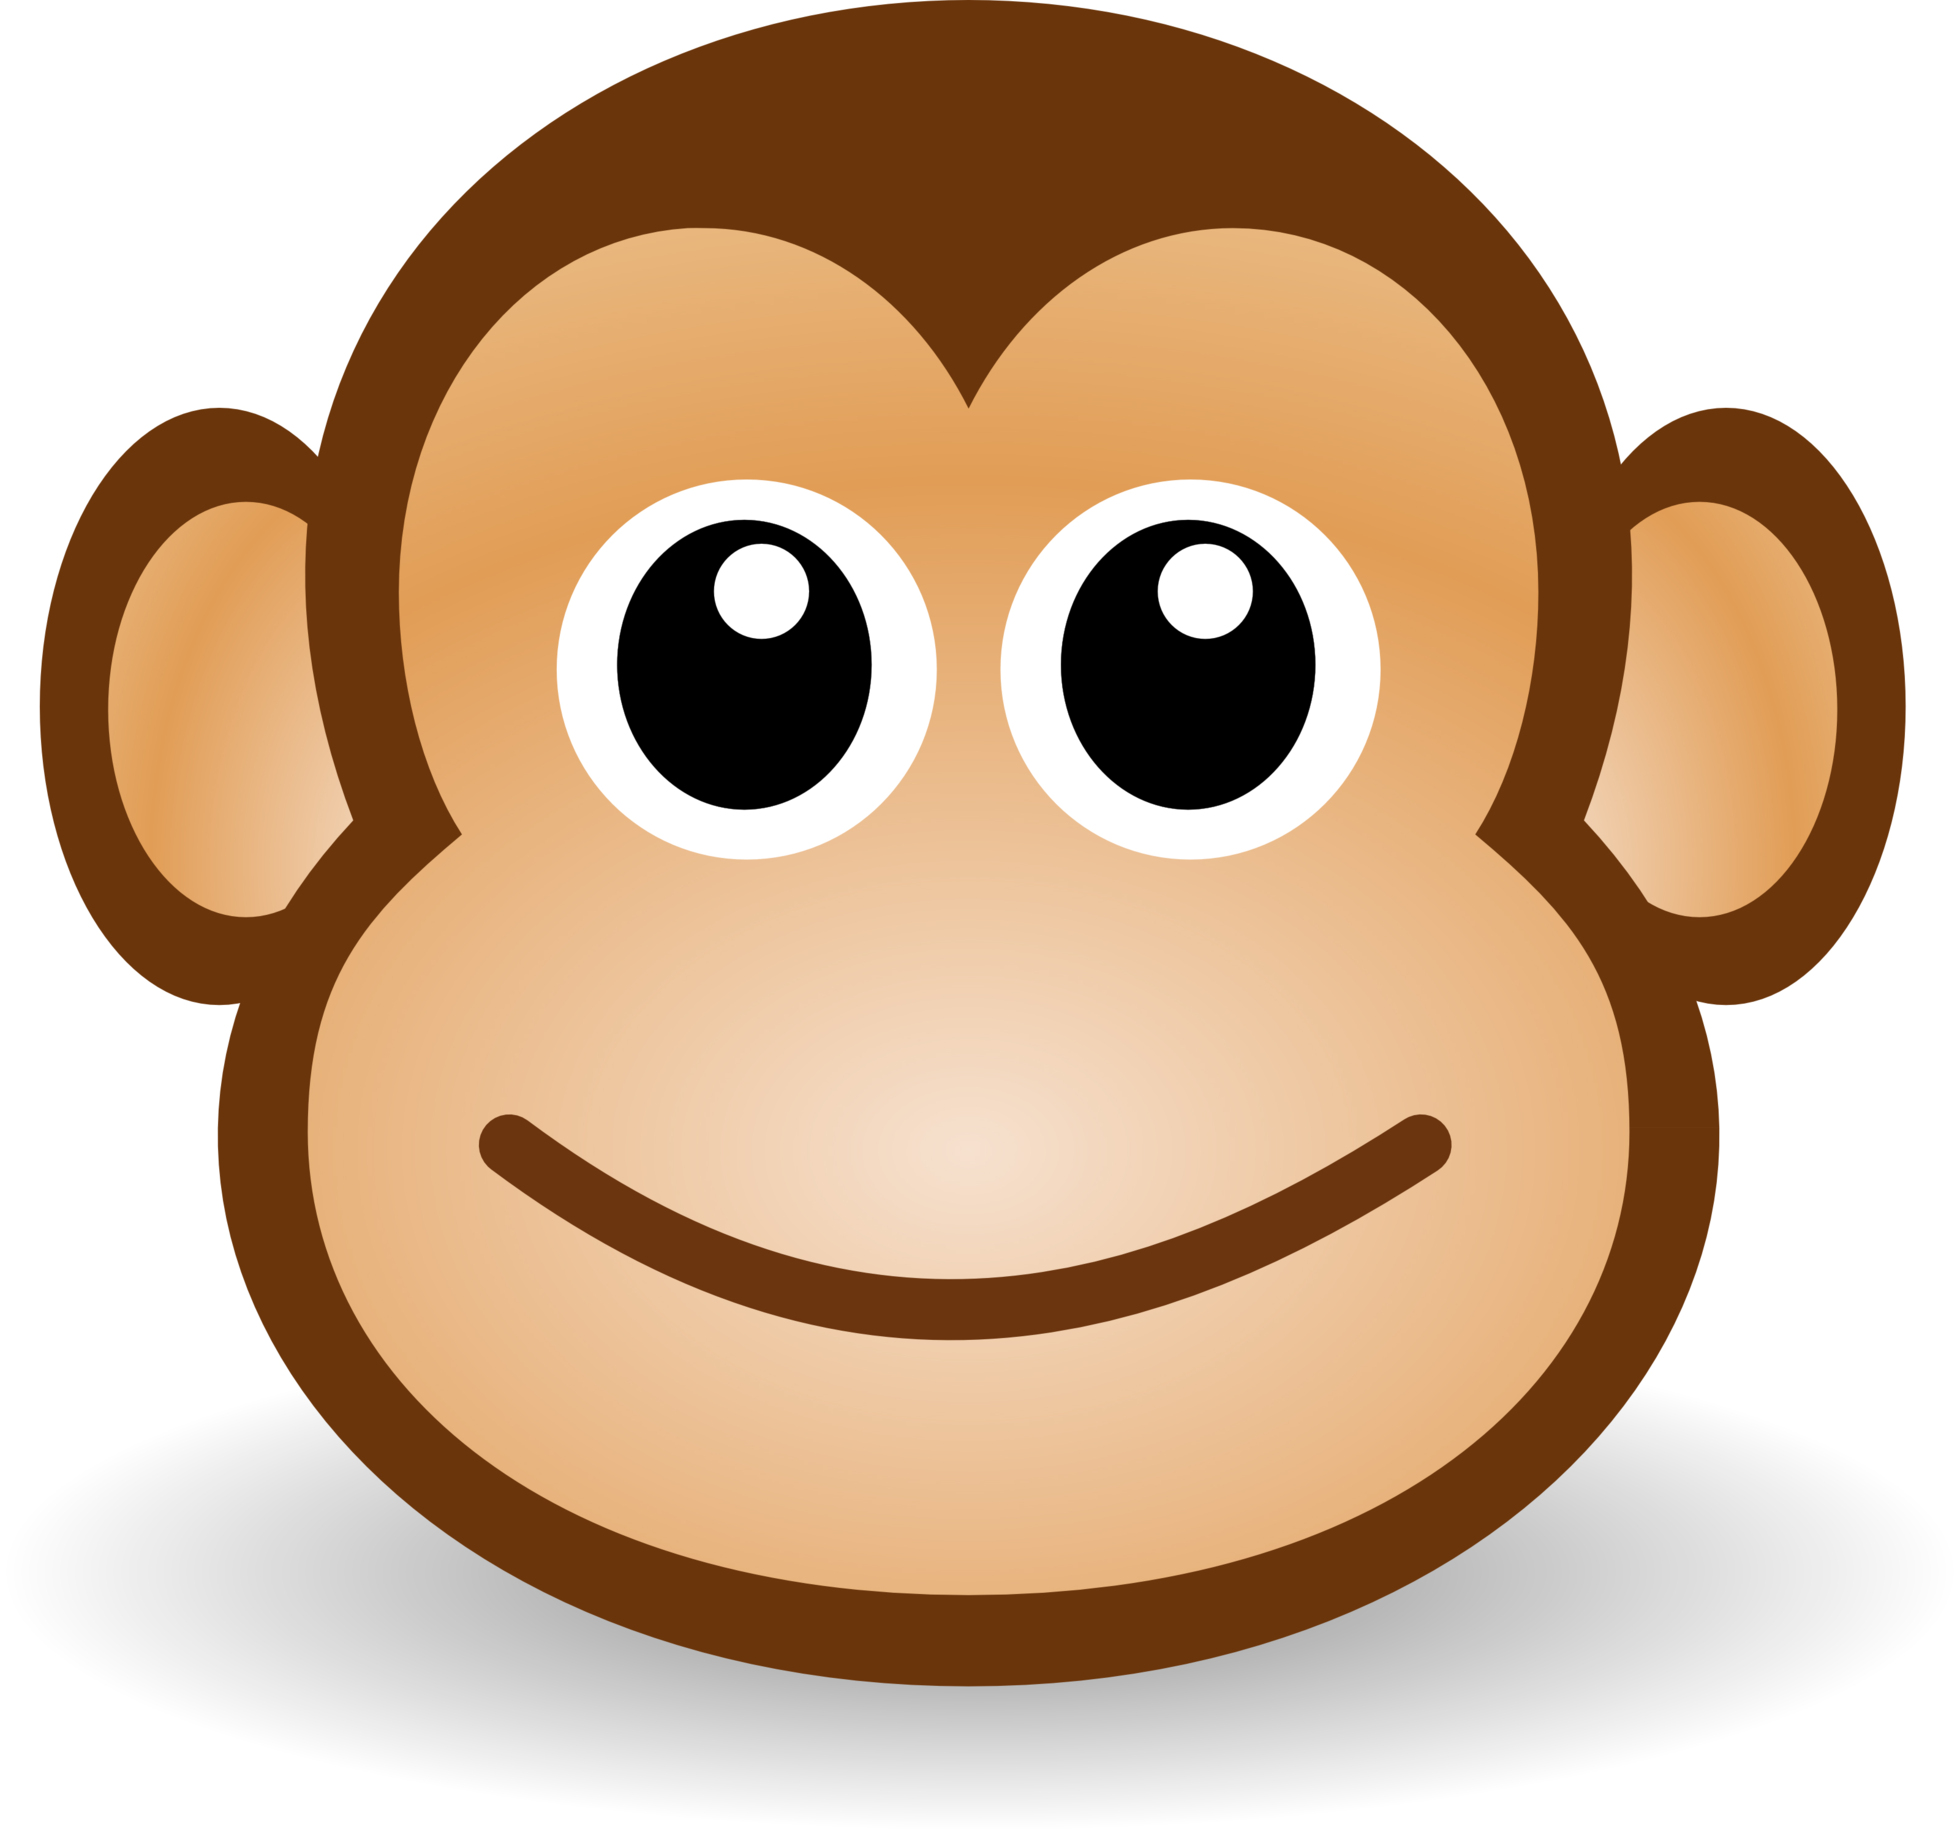 Free Monkey Images Cartoon Download Free Clip Art Free Clip Art On